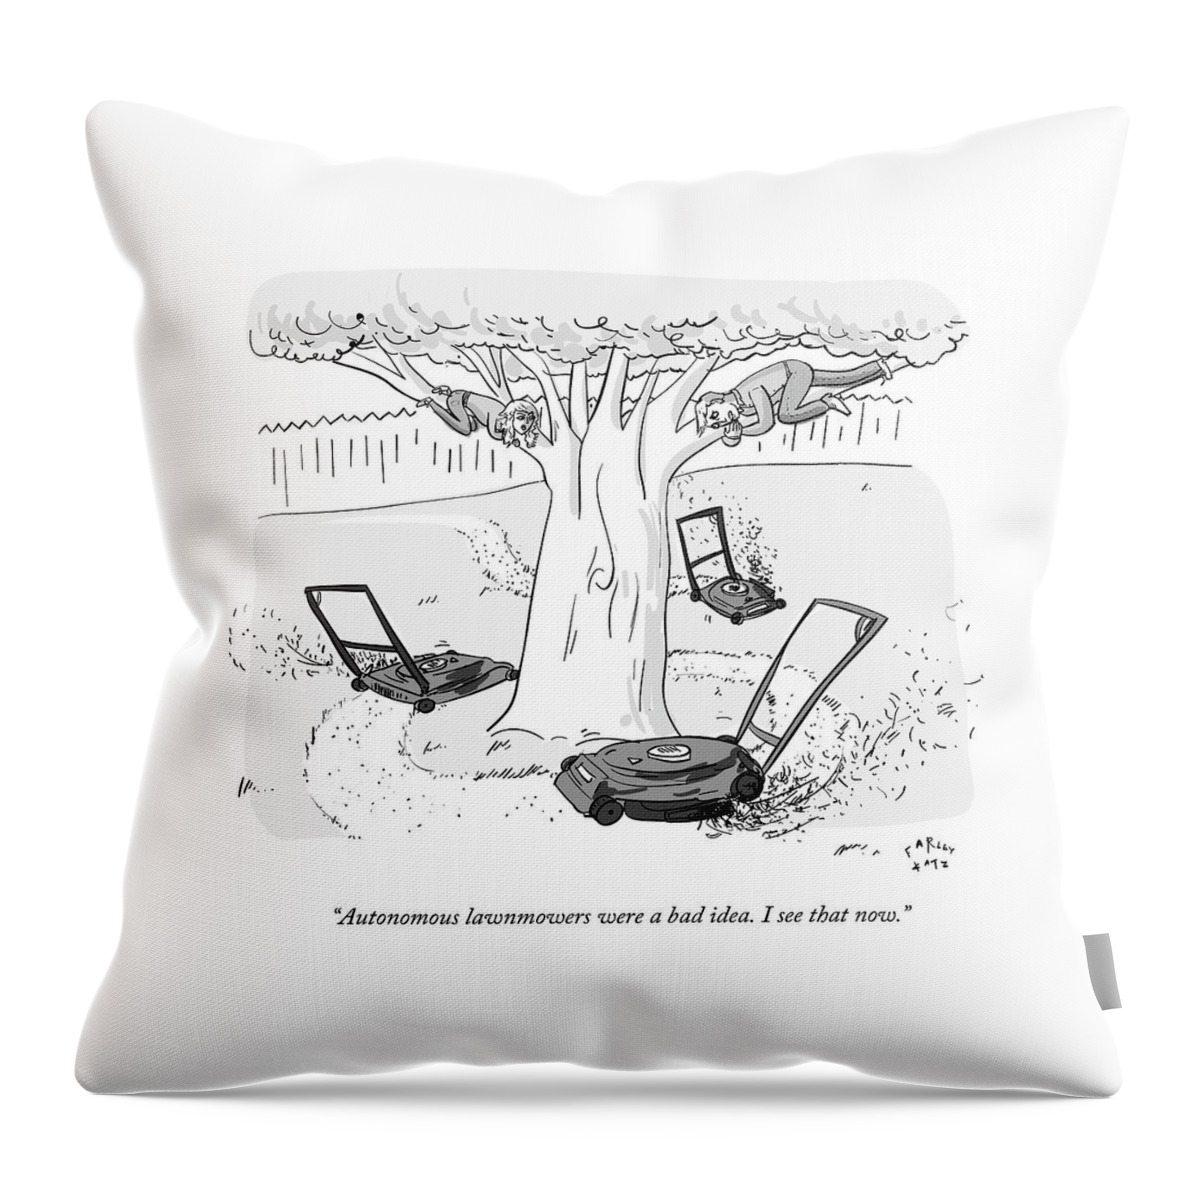 Two Individuals Cling To Tree Branches As Three Throw Pillow